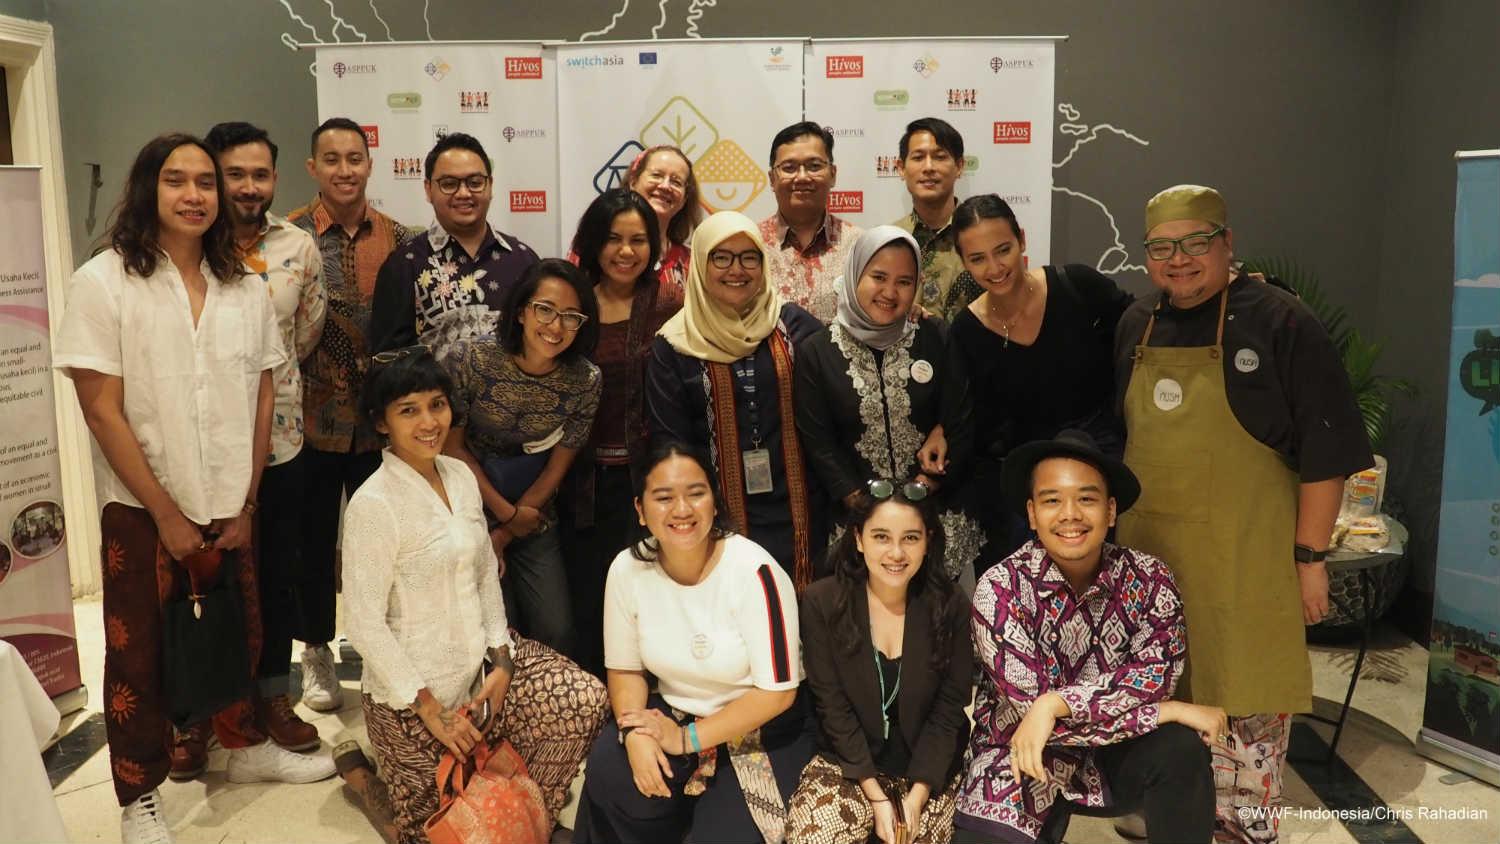 Wise Foodways campaign in Indonesia - Hivos